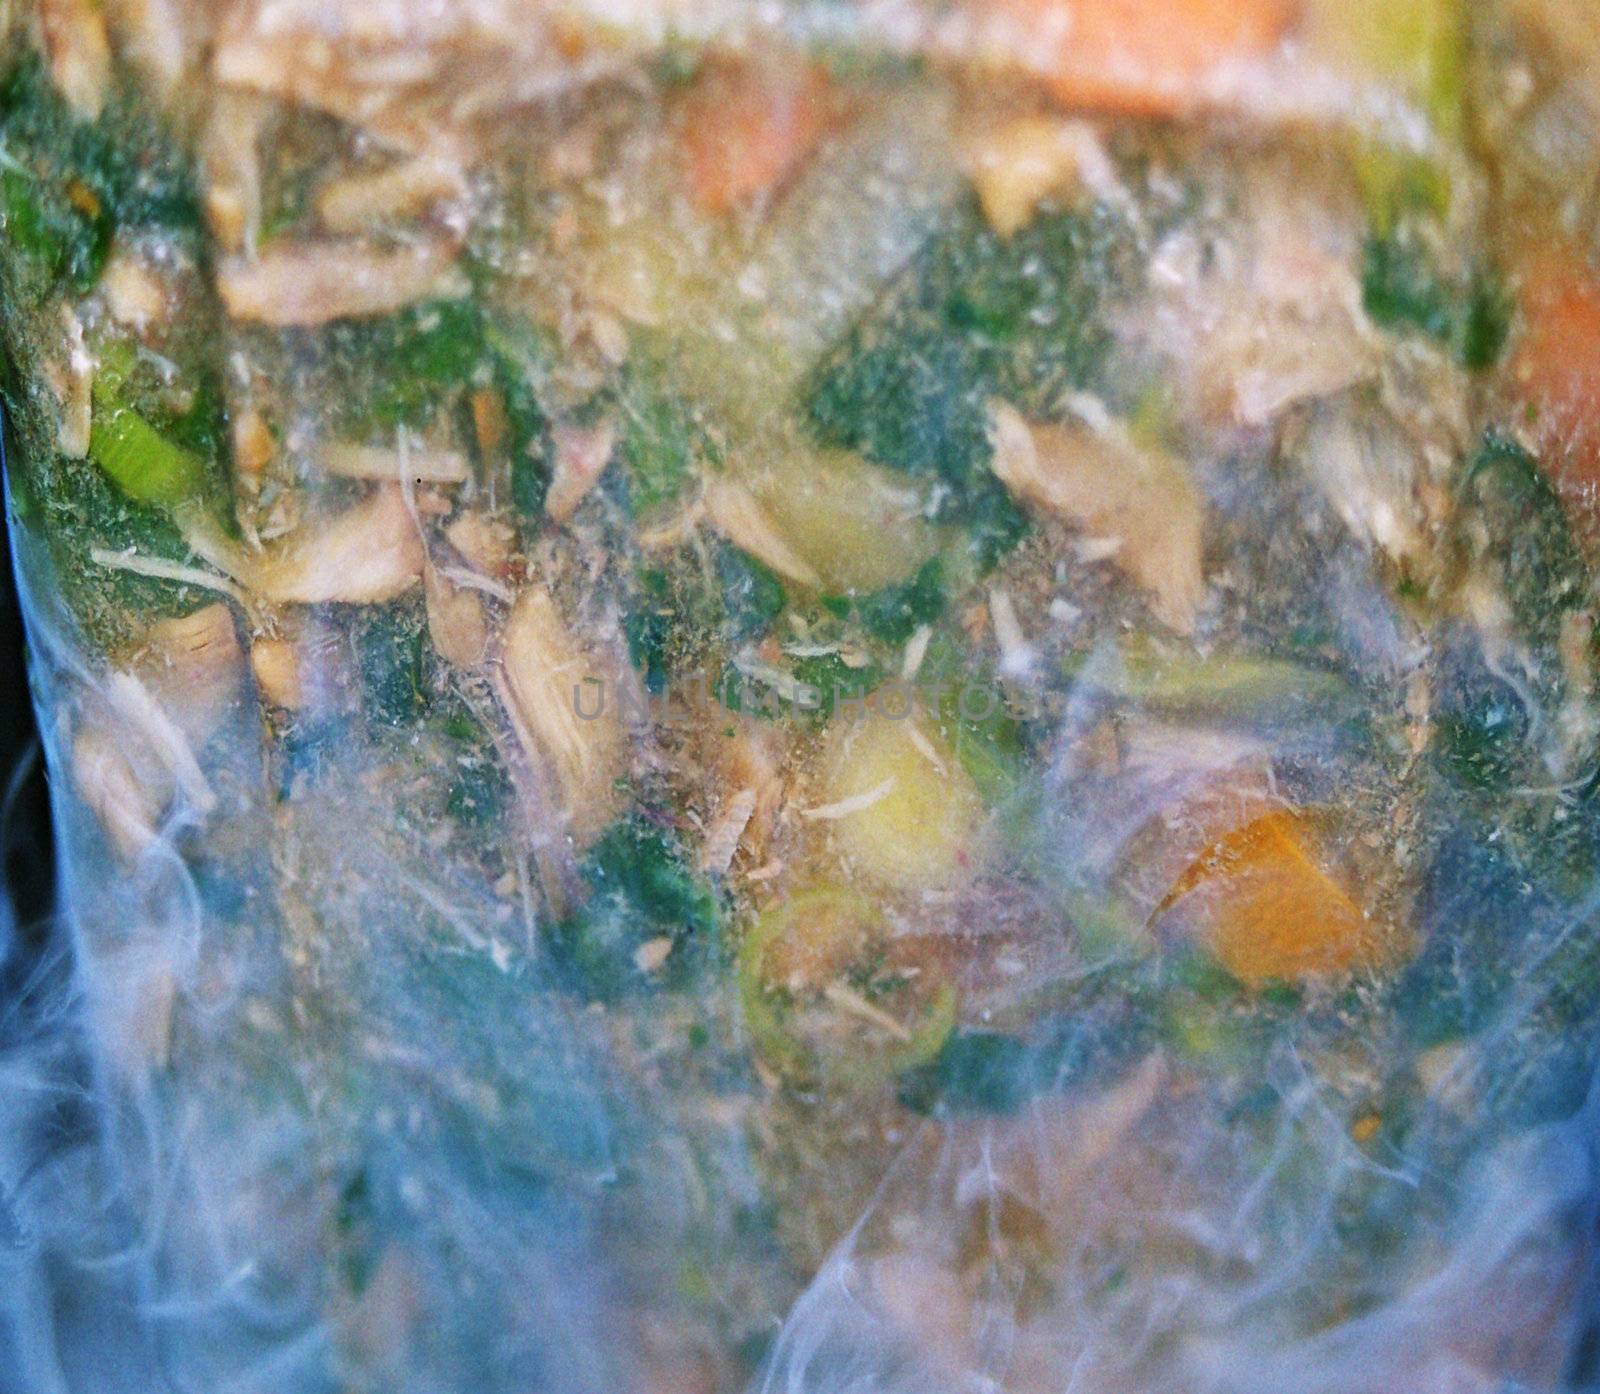 frozen food thawing/cooking